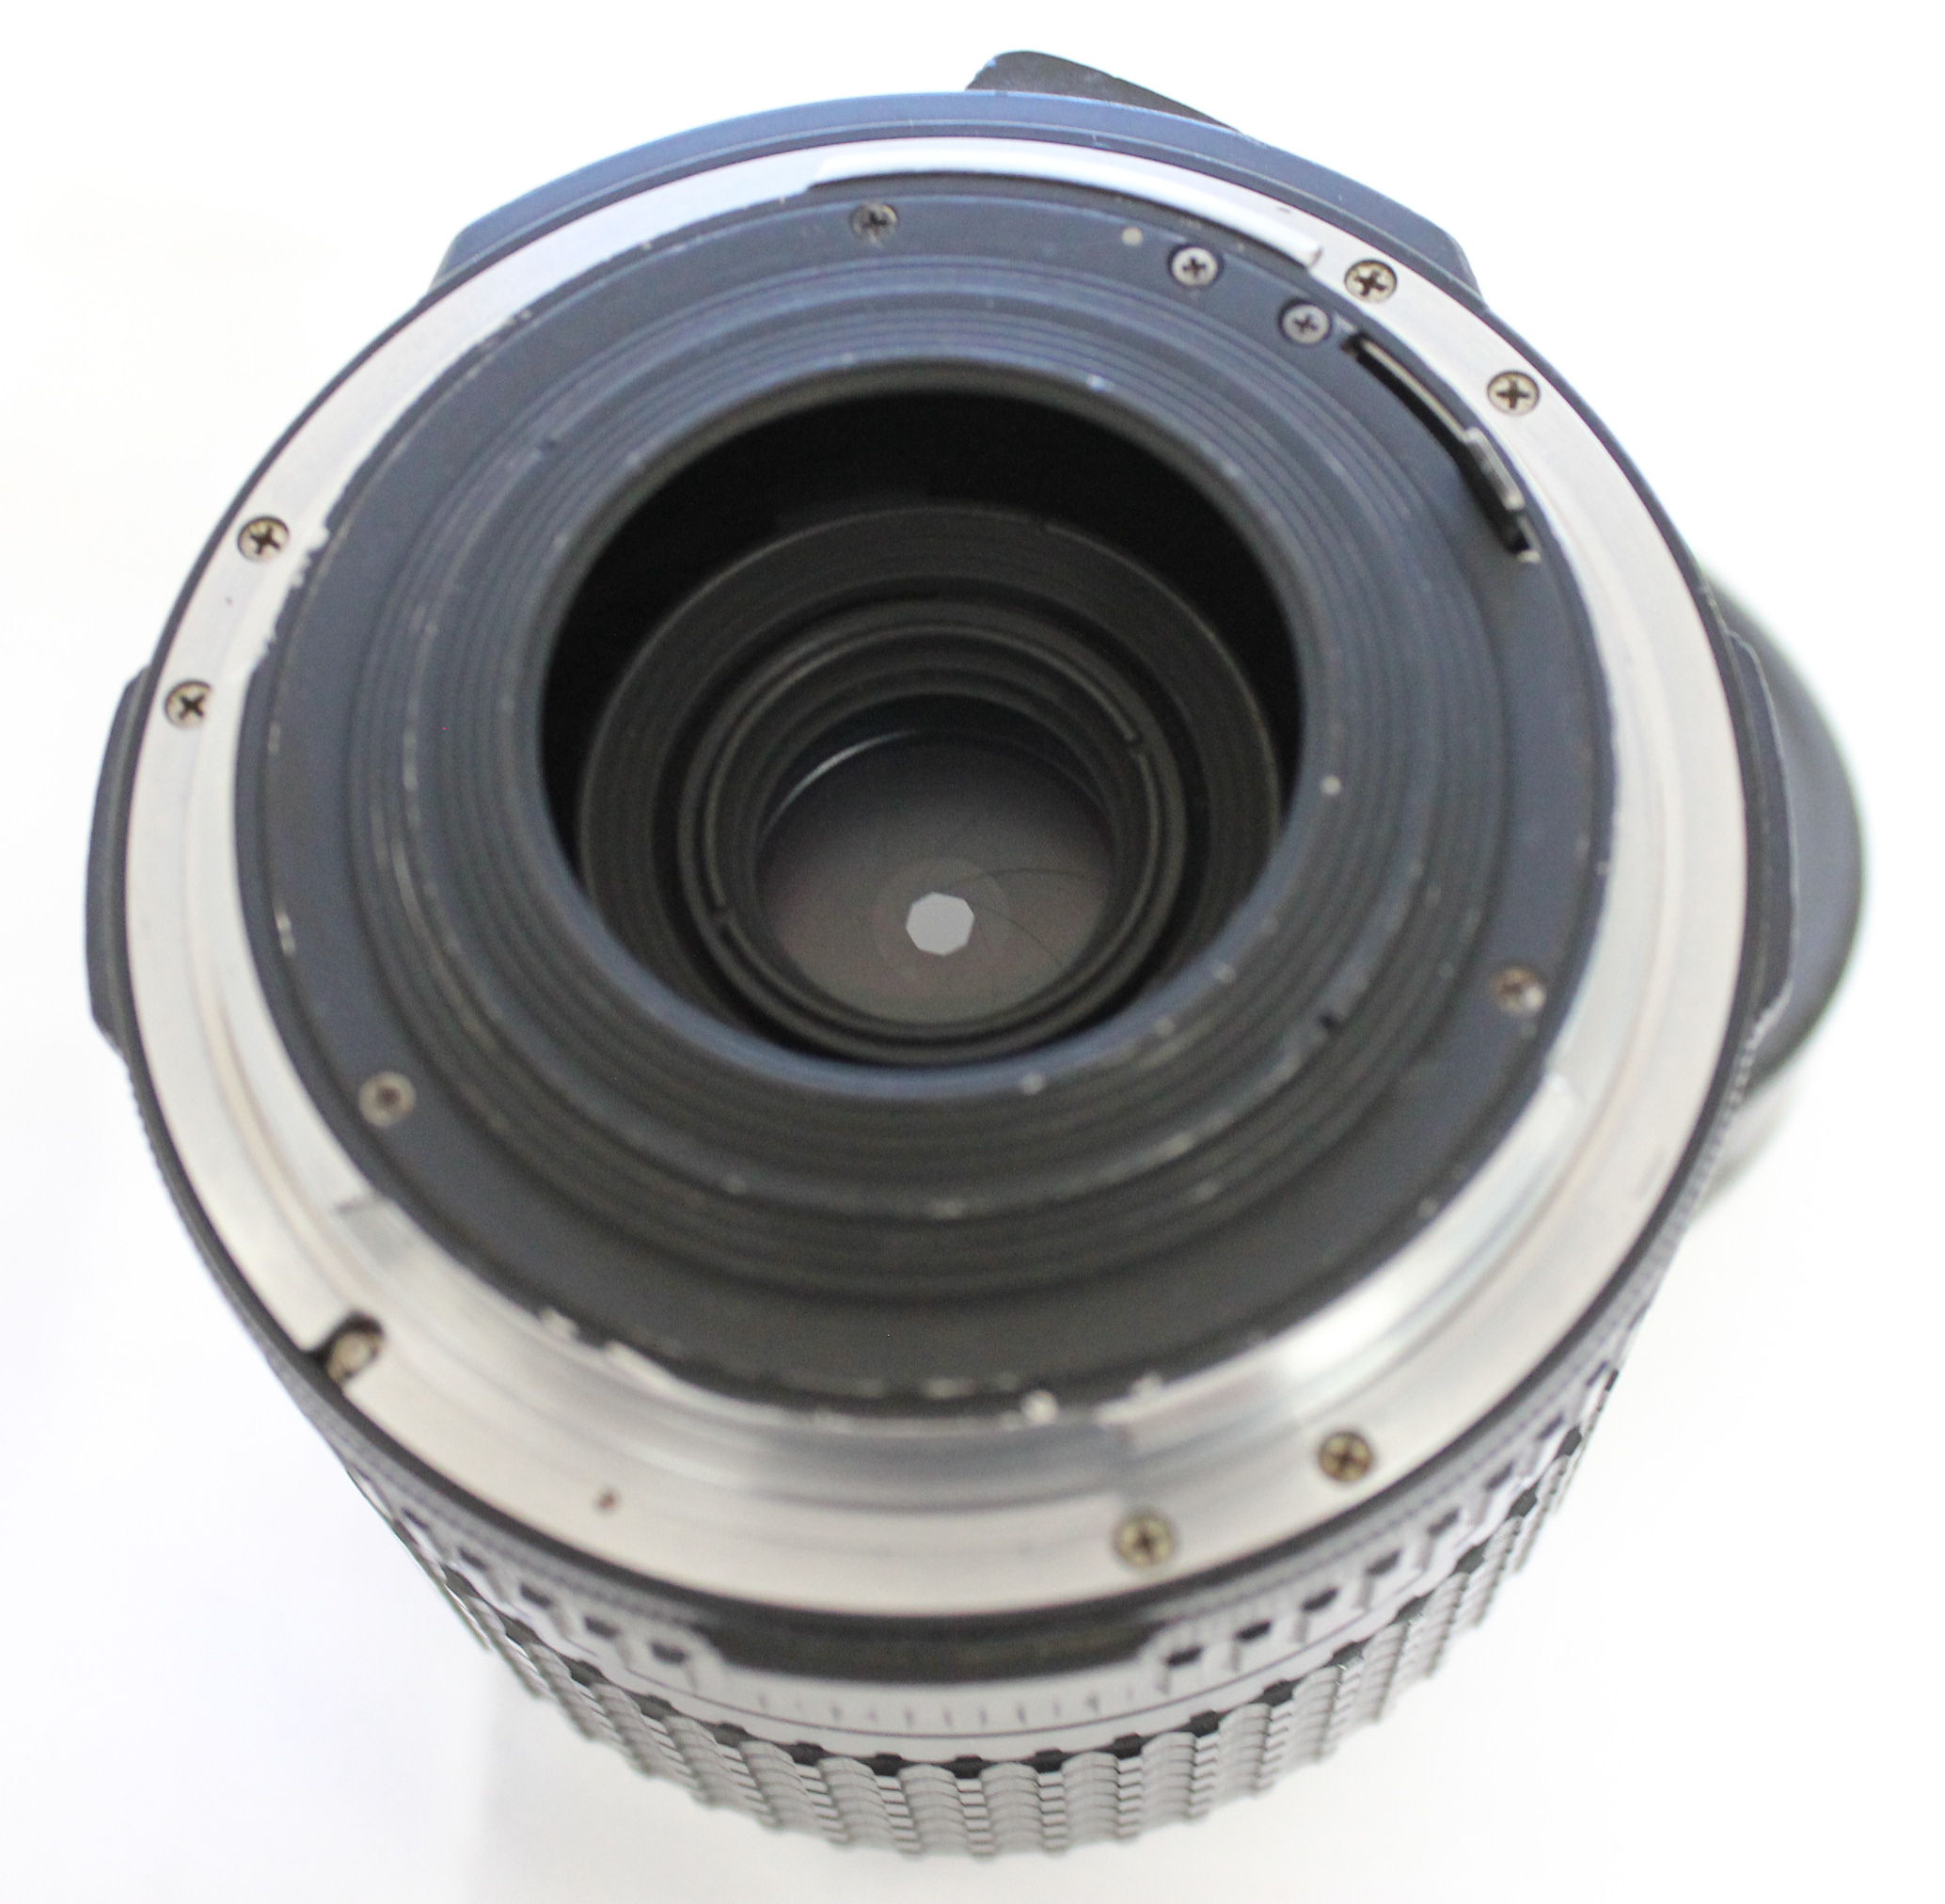  SMC Pentax 67 55mm F/4 Lens for Pentax 67 67II from Japan Photo 7